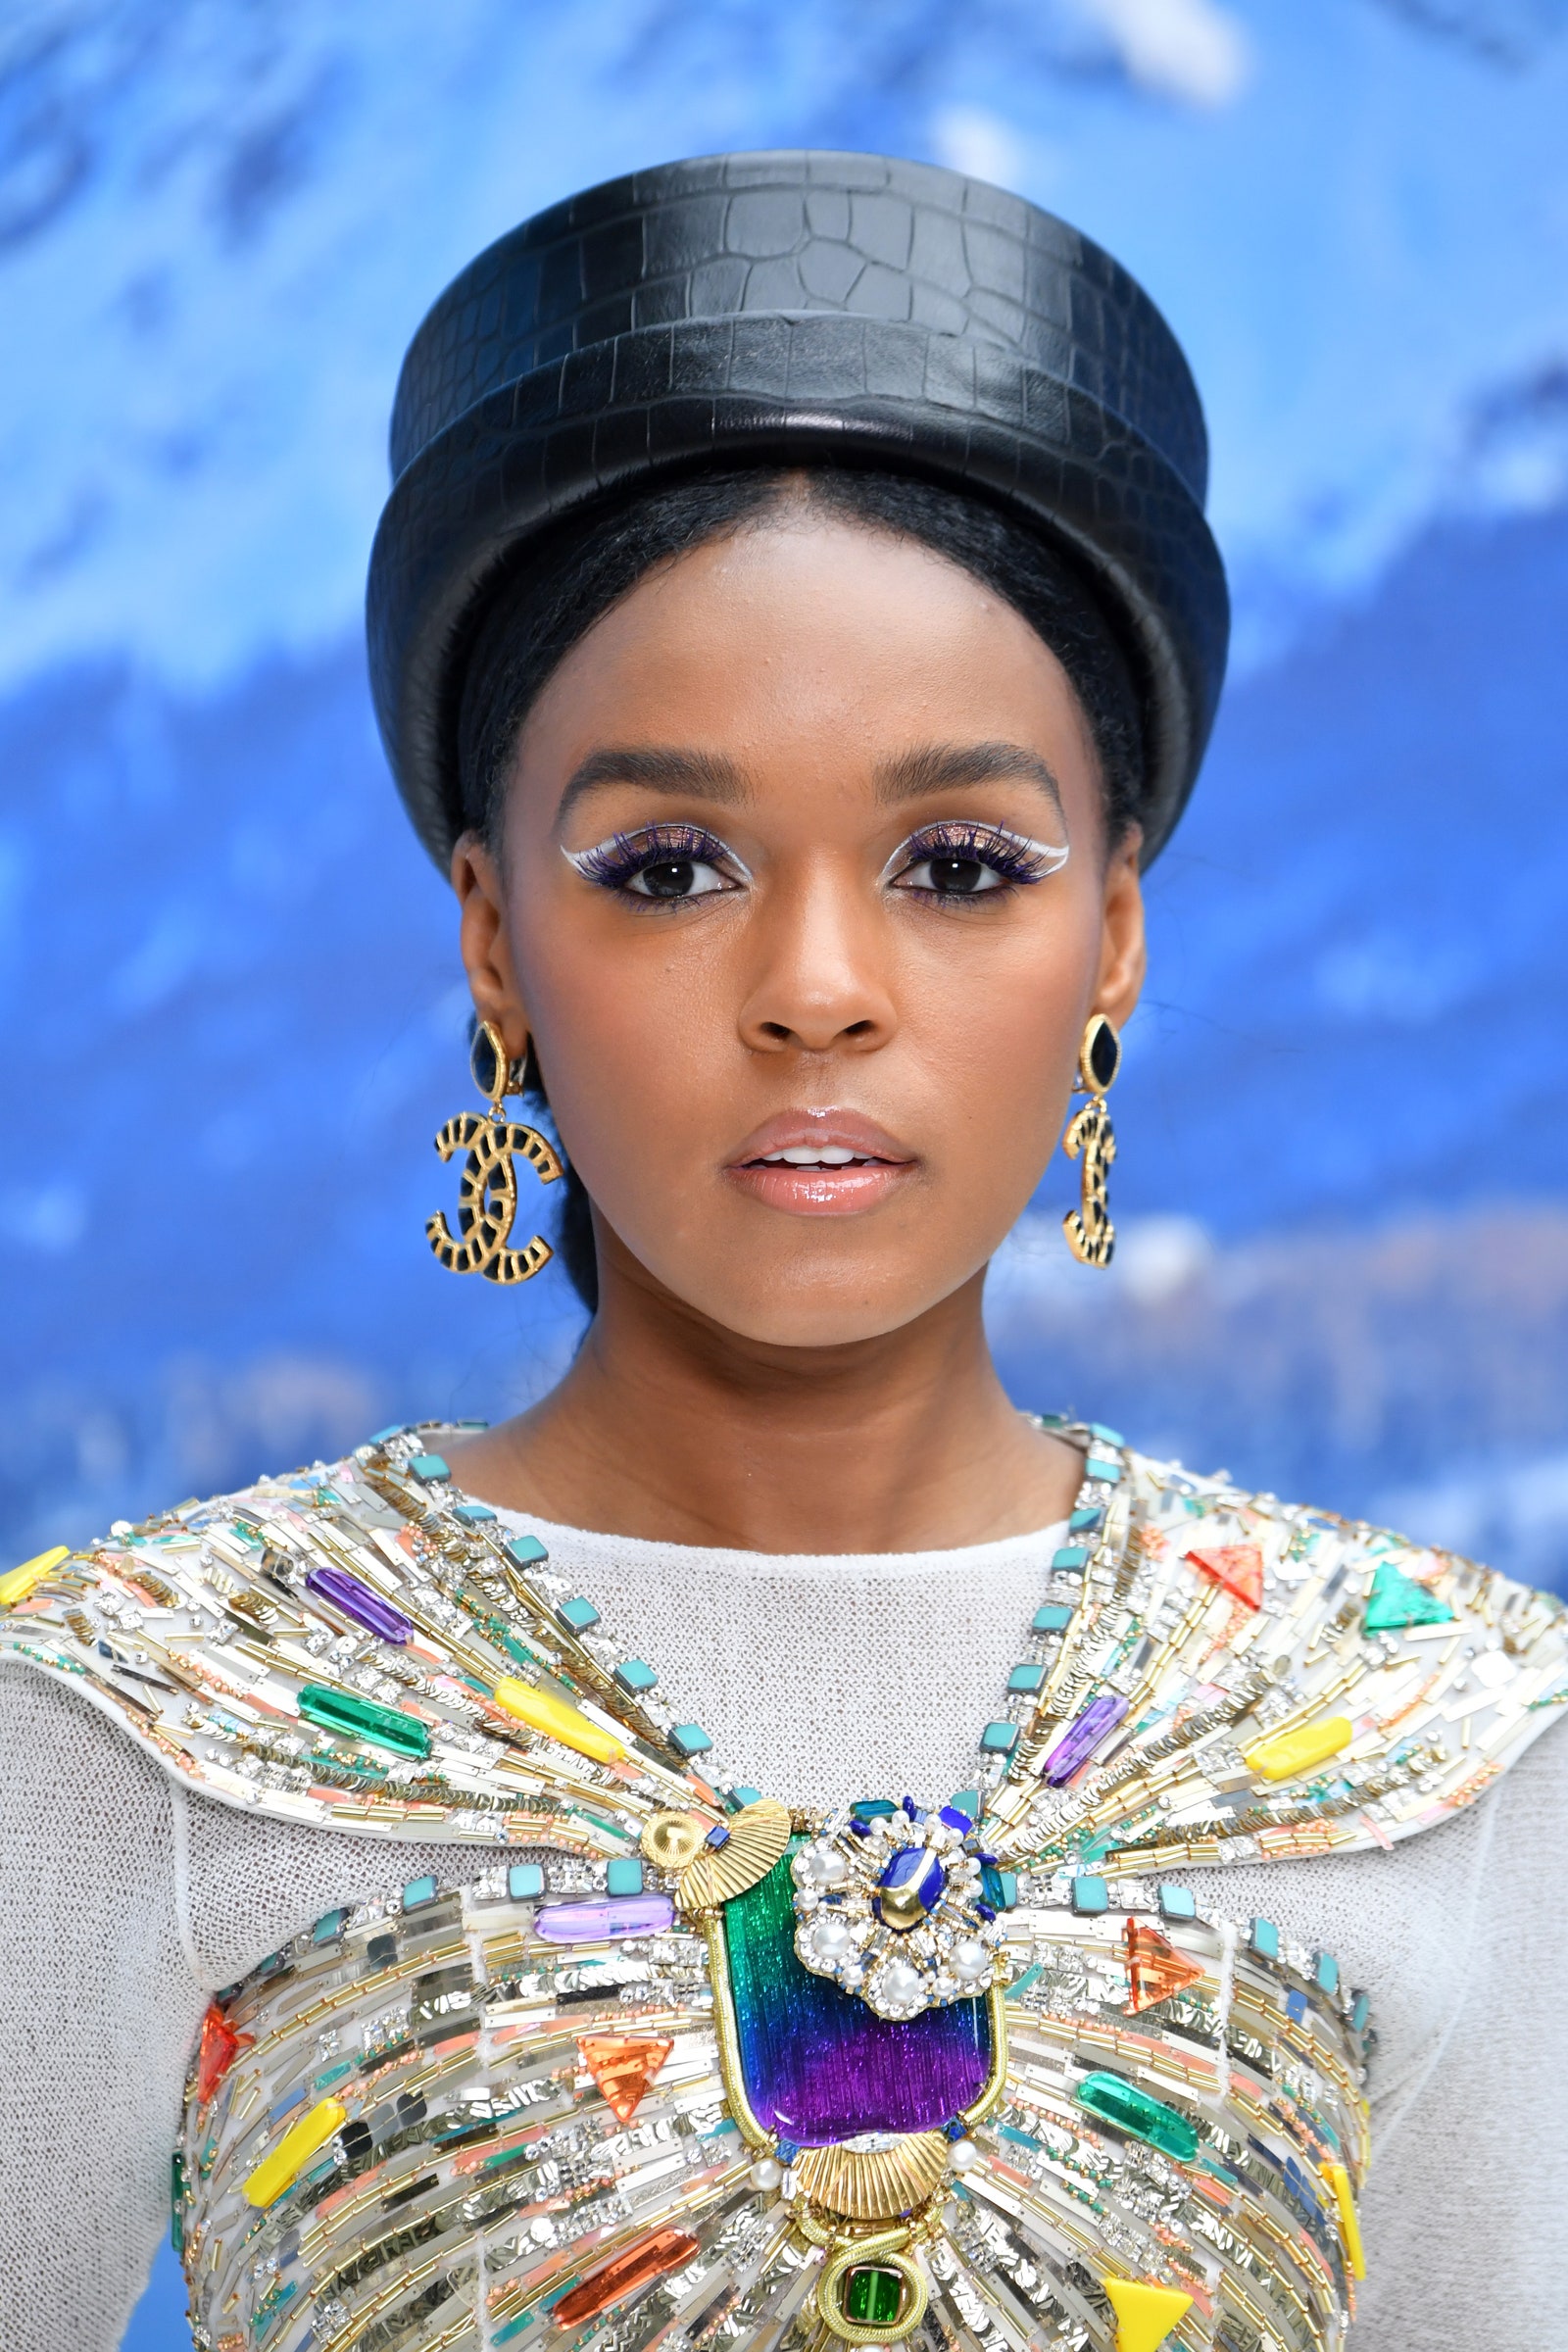 Janelle Monae in a black hat with white negative space eyeliner '70s makeup trend